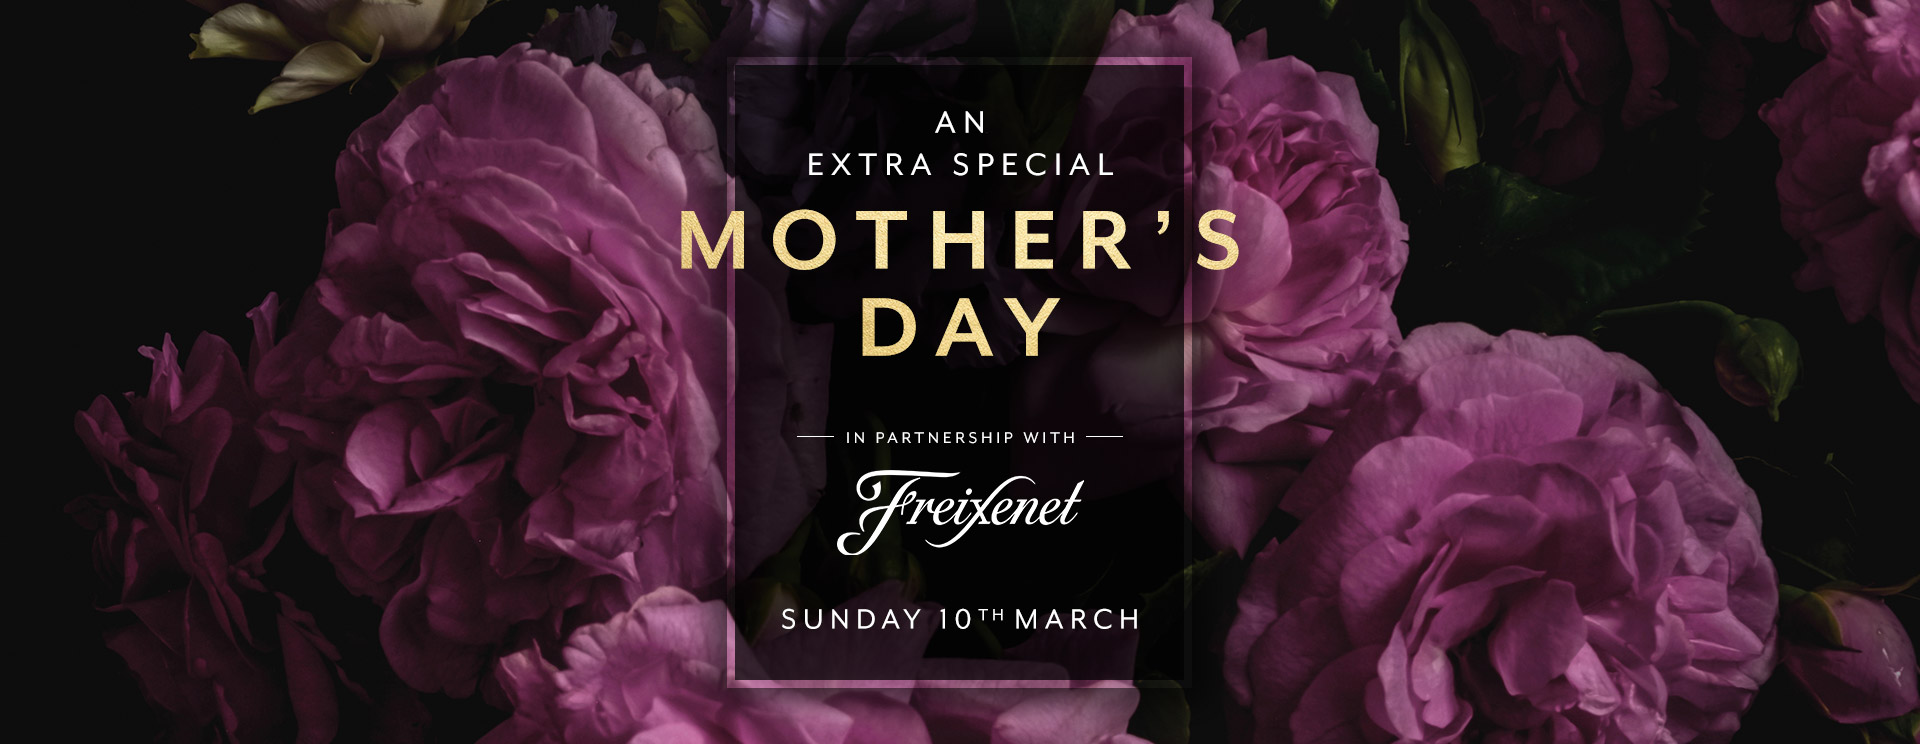 Mother’s Day menu/meal in St Albans